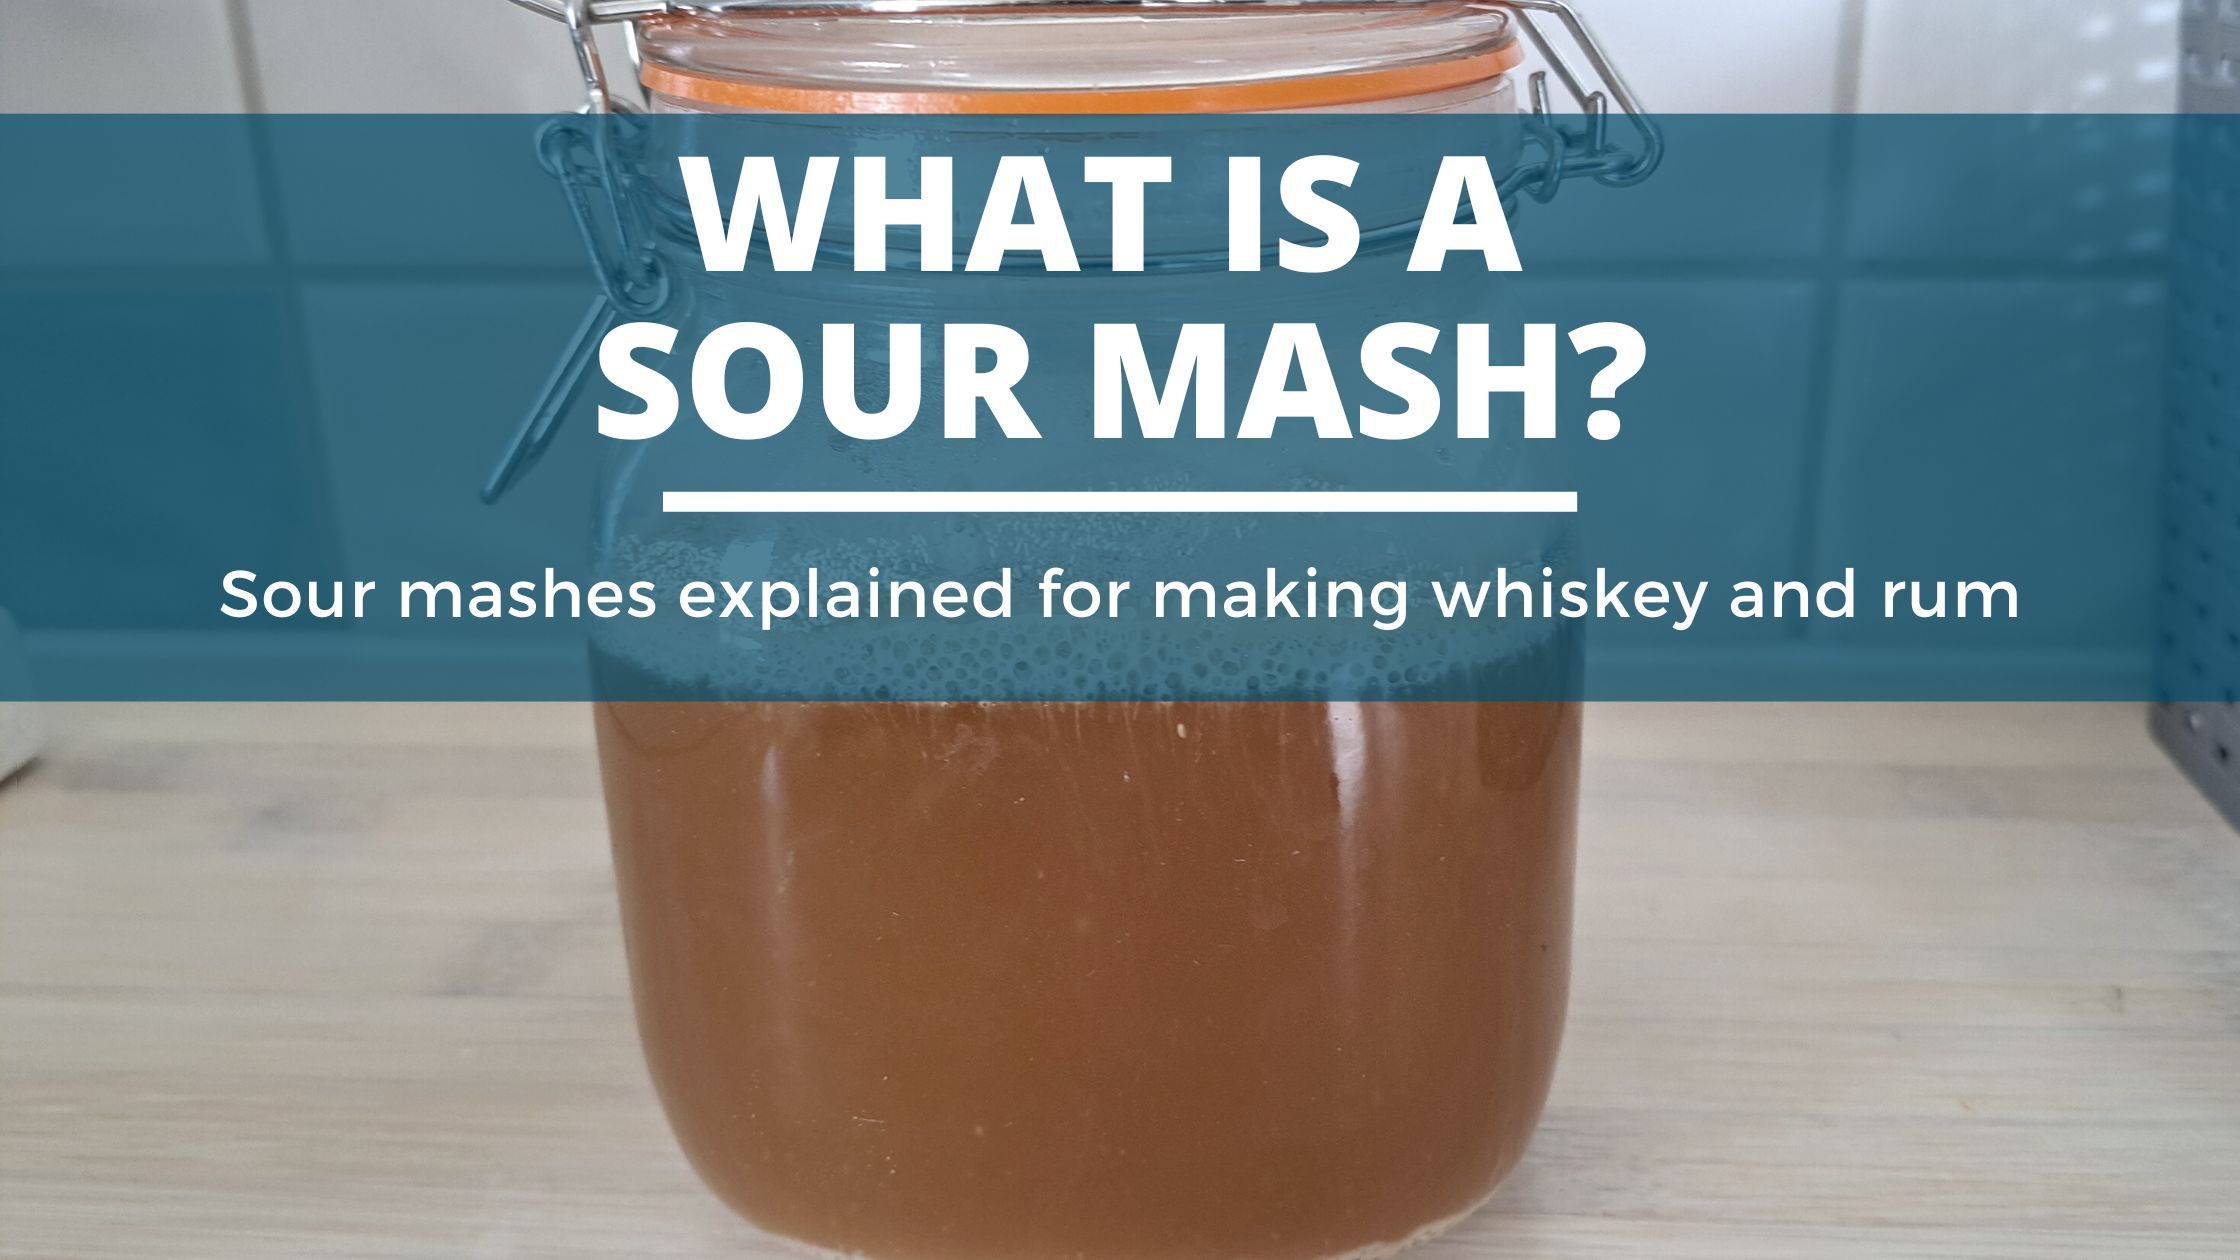 Image of diy distilling what is a sour mash whiskey